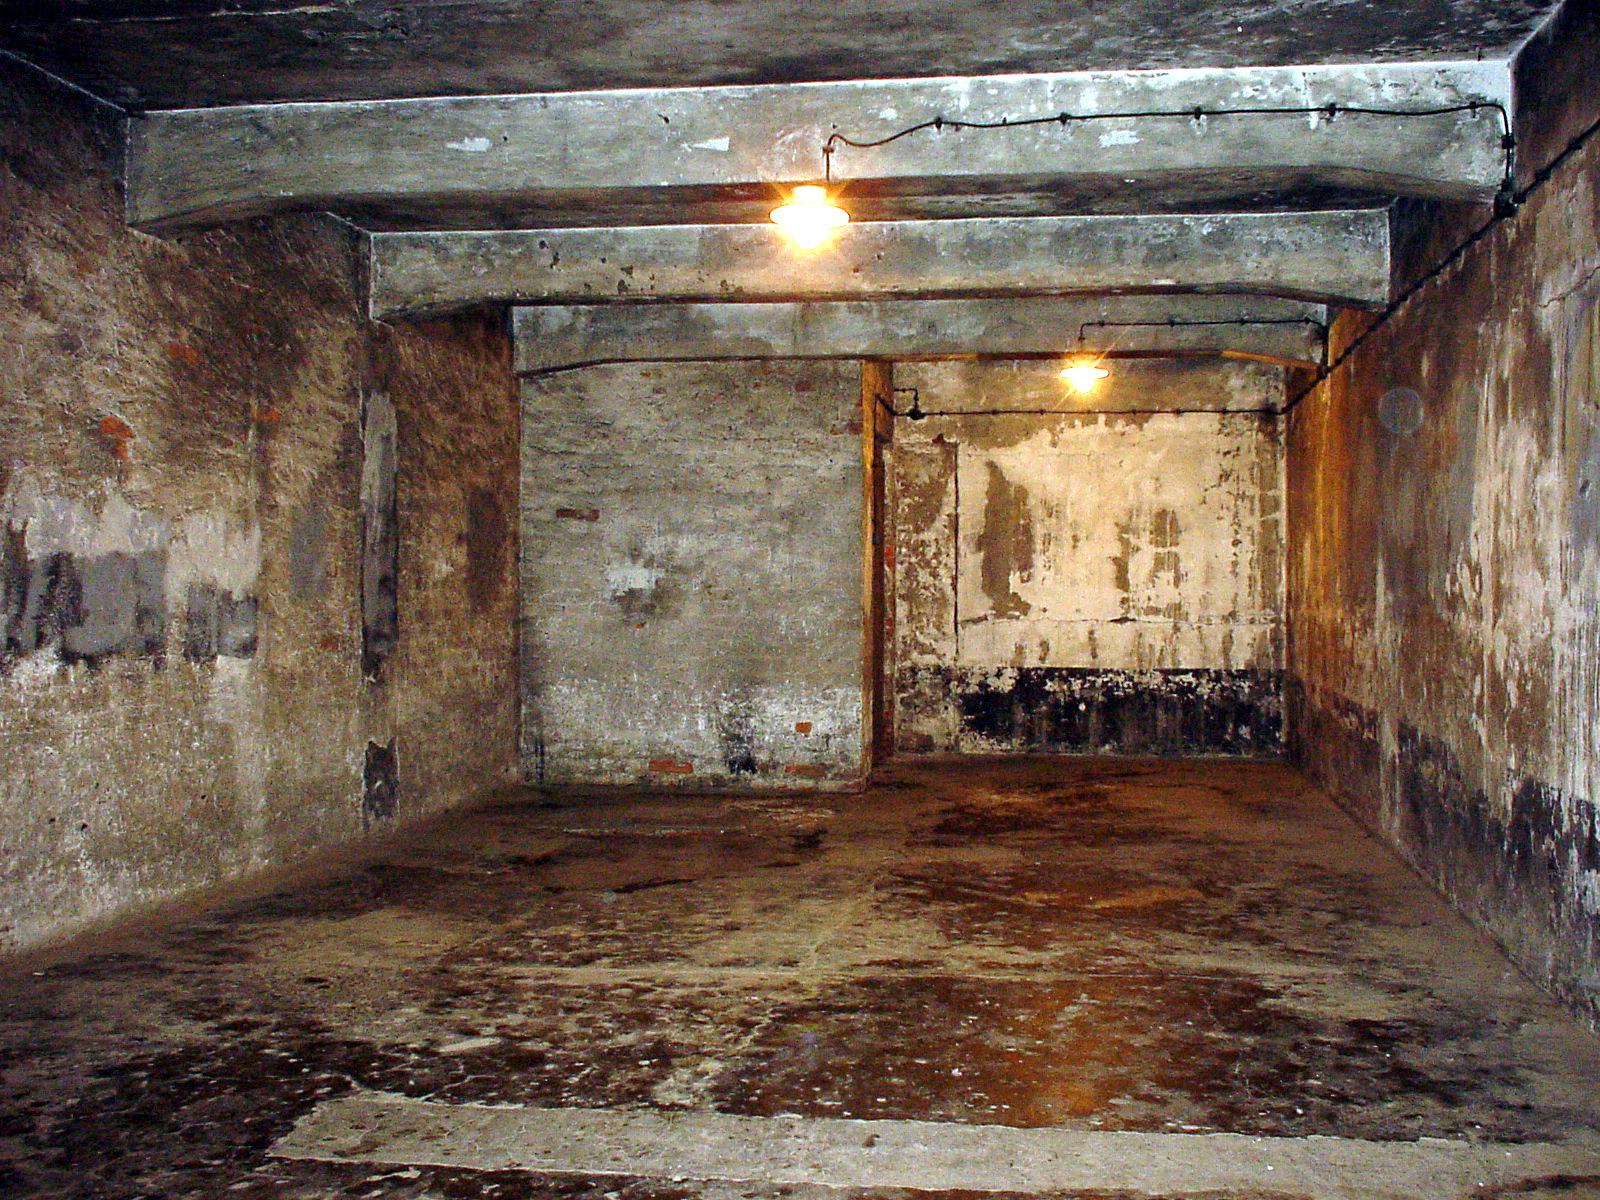 Concentration camps gas chambers